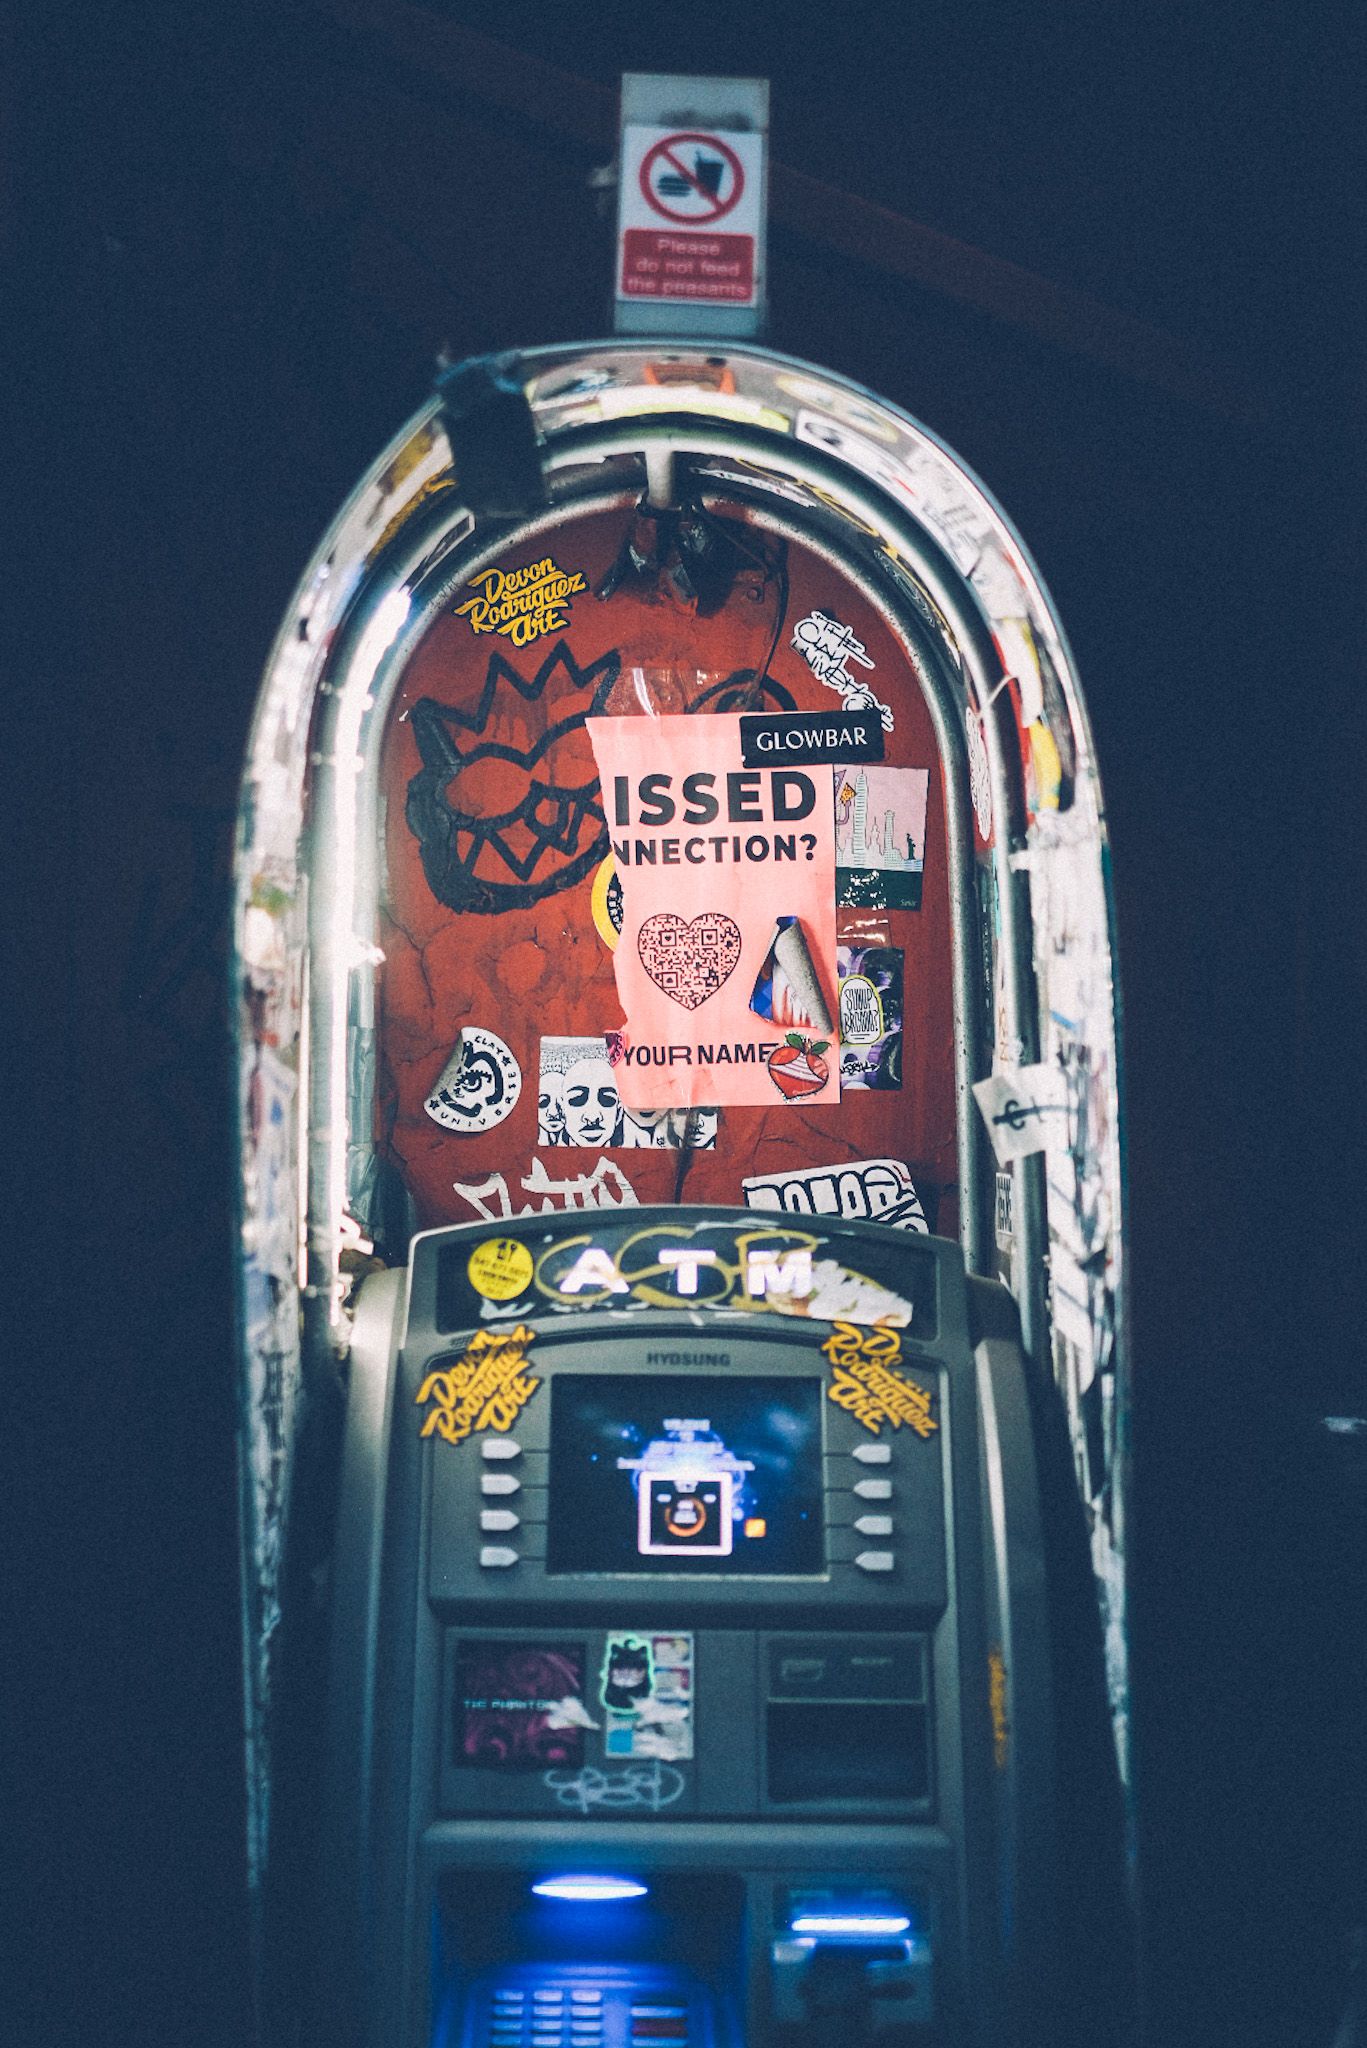 An outdoor ATM machine with stickers and graffiti sits in the dark, with a torn “missed connection” paper hanging in the center.